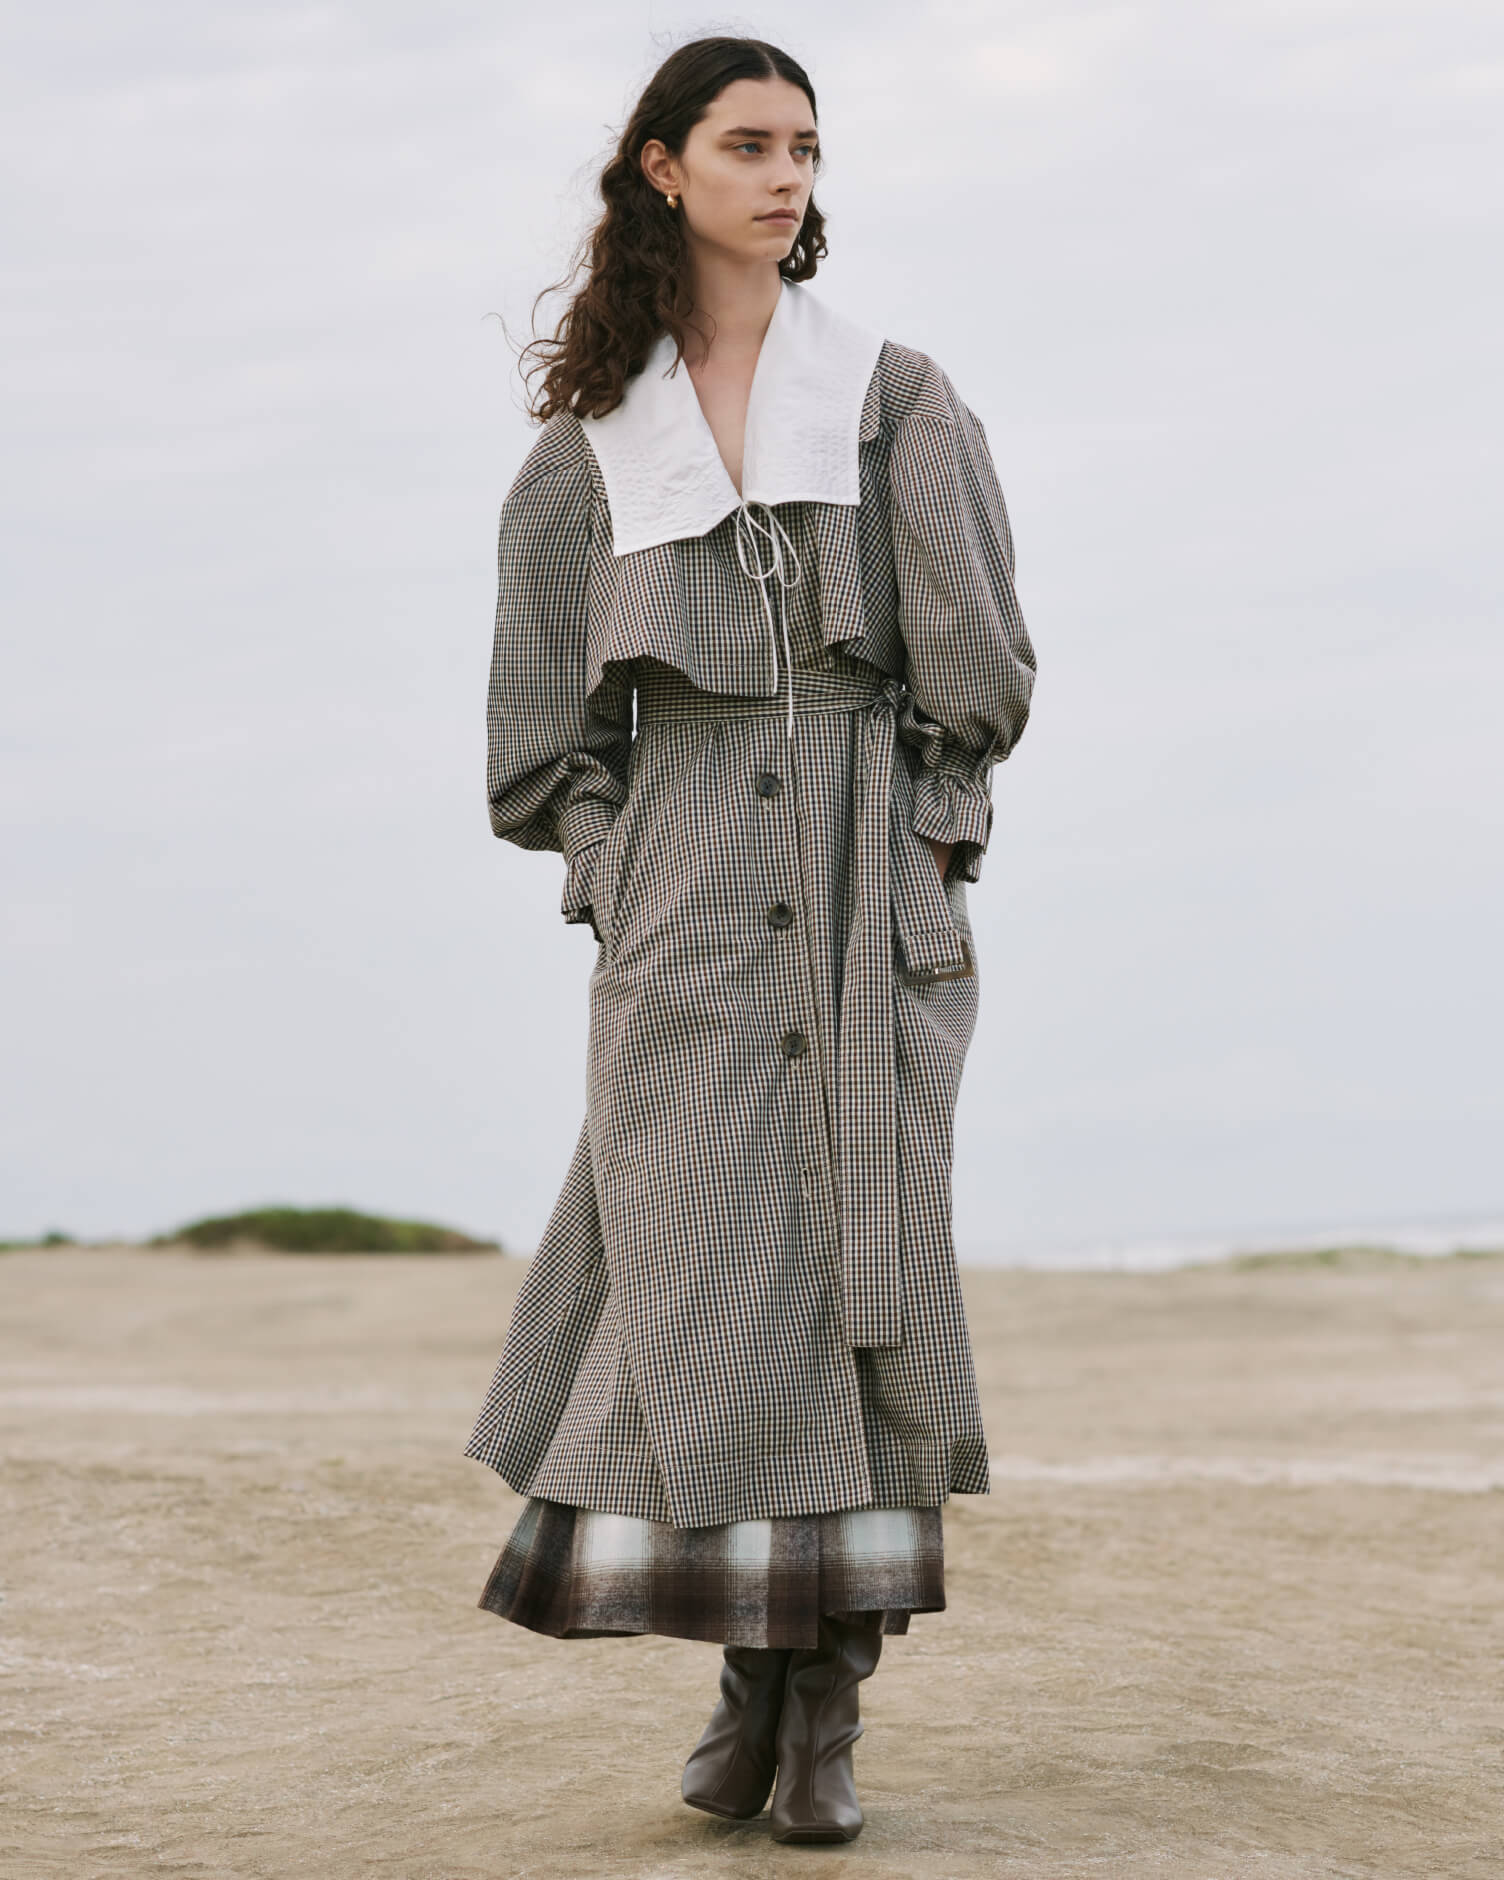 2021 Autumn Winter 1st Collection | SNIDEL（スナイデル）公式サイト